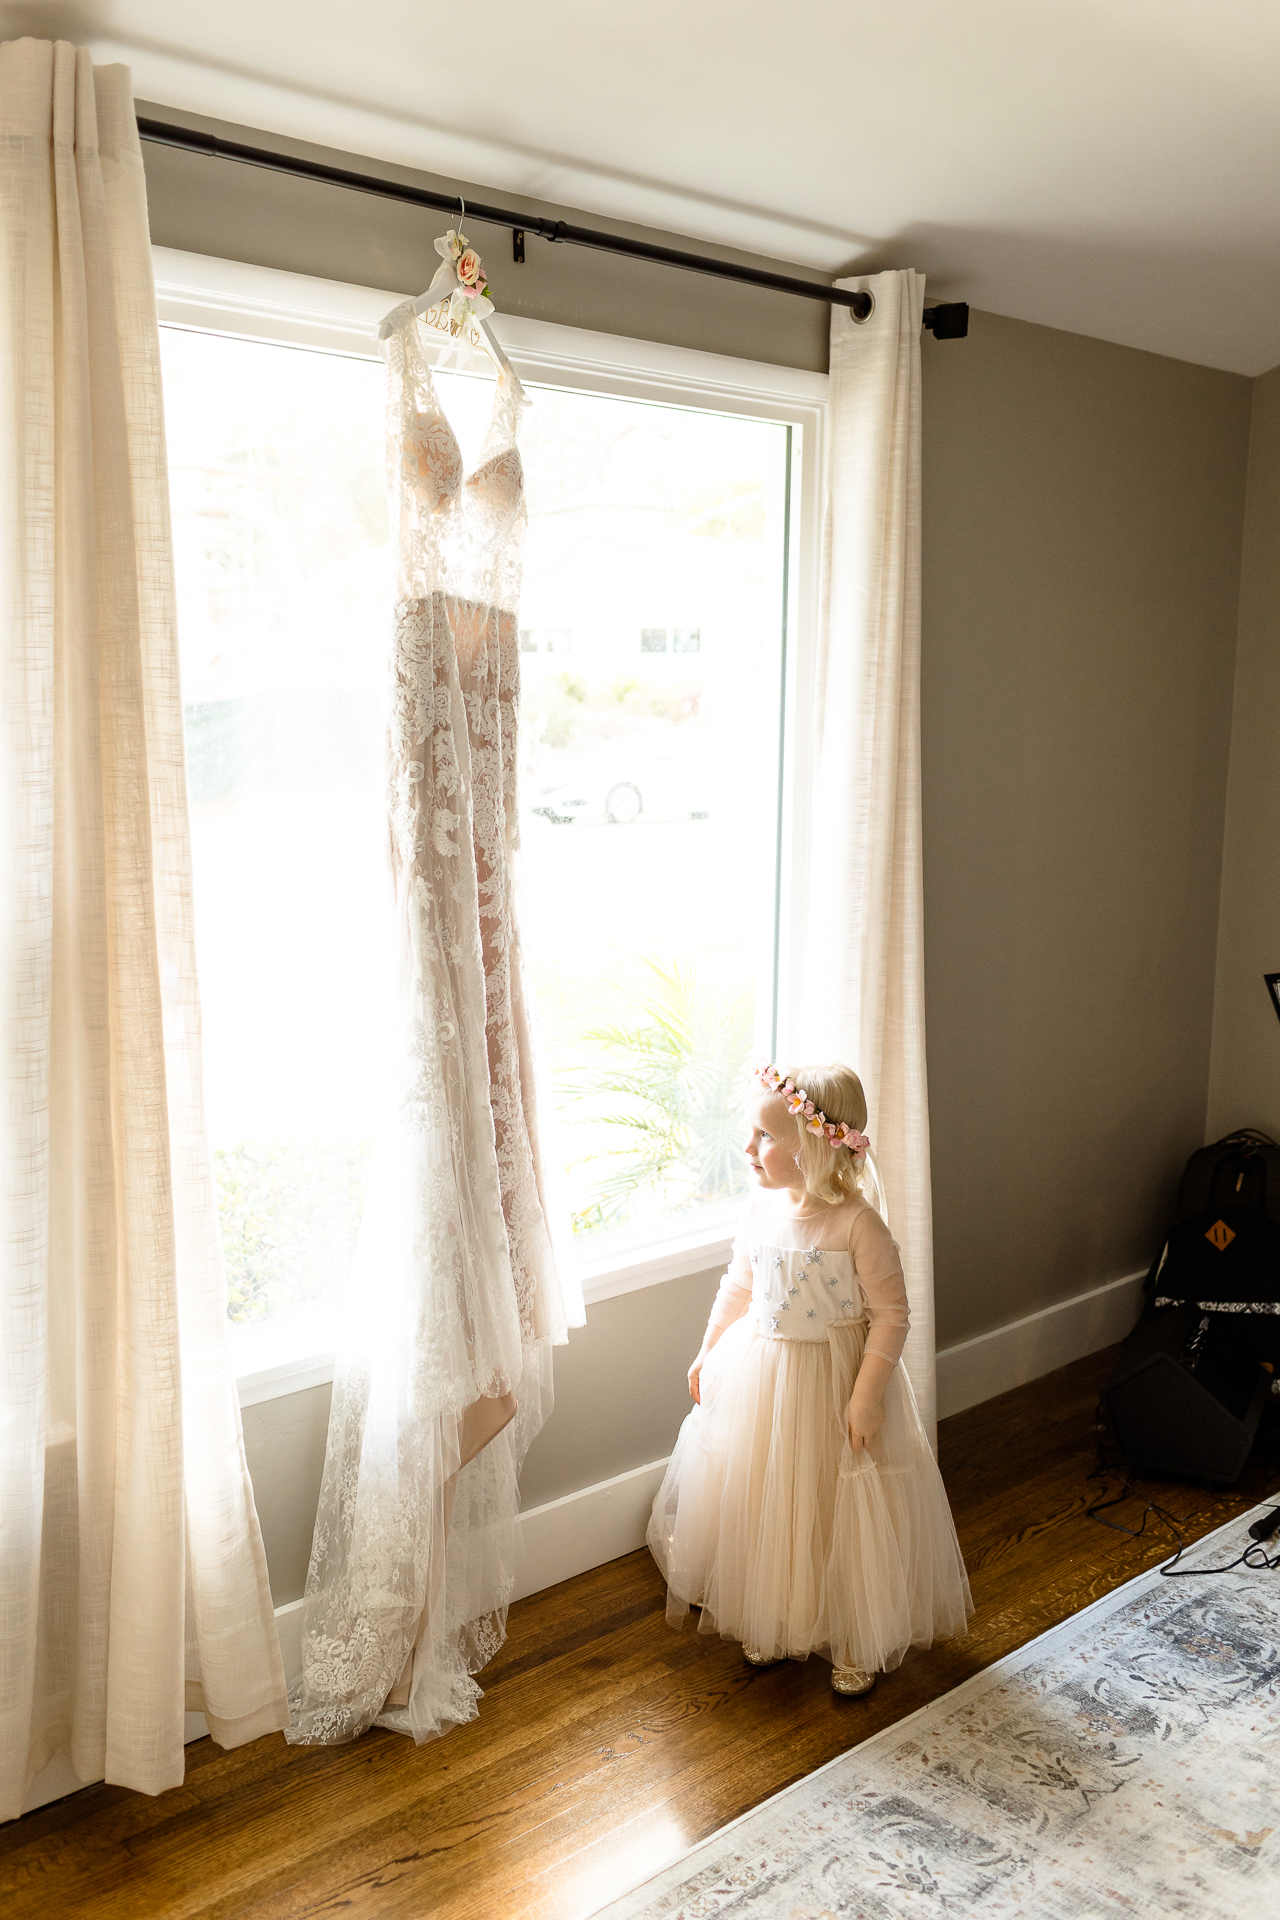 palos verdes wedding photography bride getting ready pictures